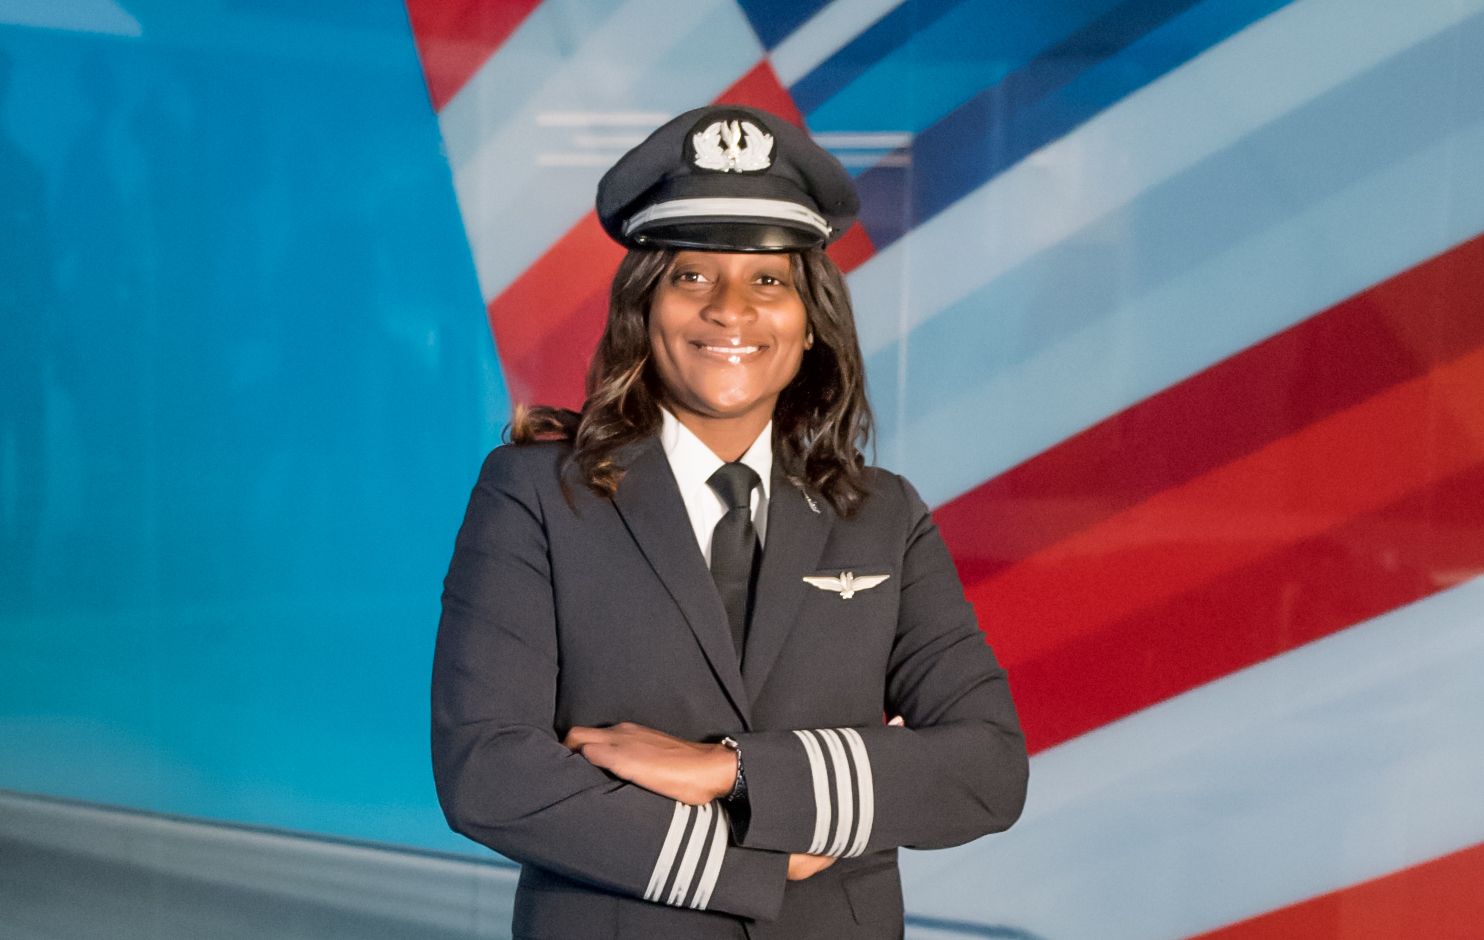 An American Airlines pilot wearing her uniform.